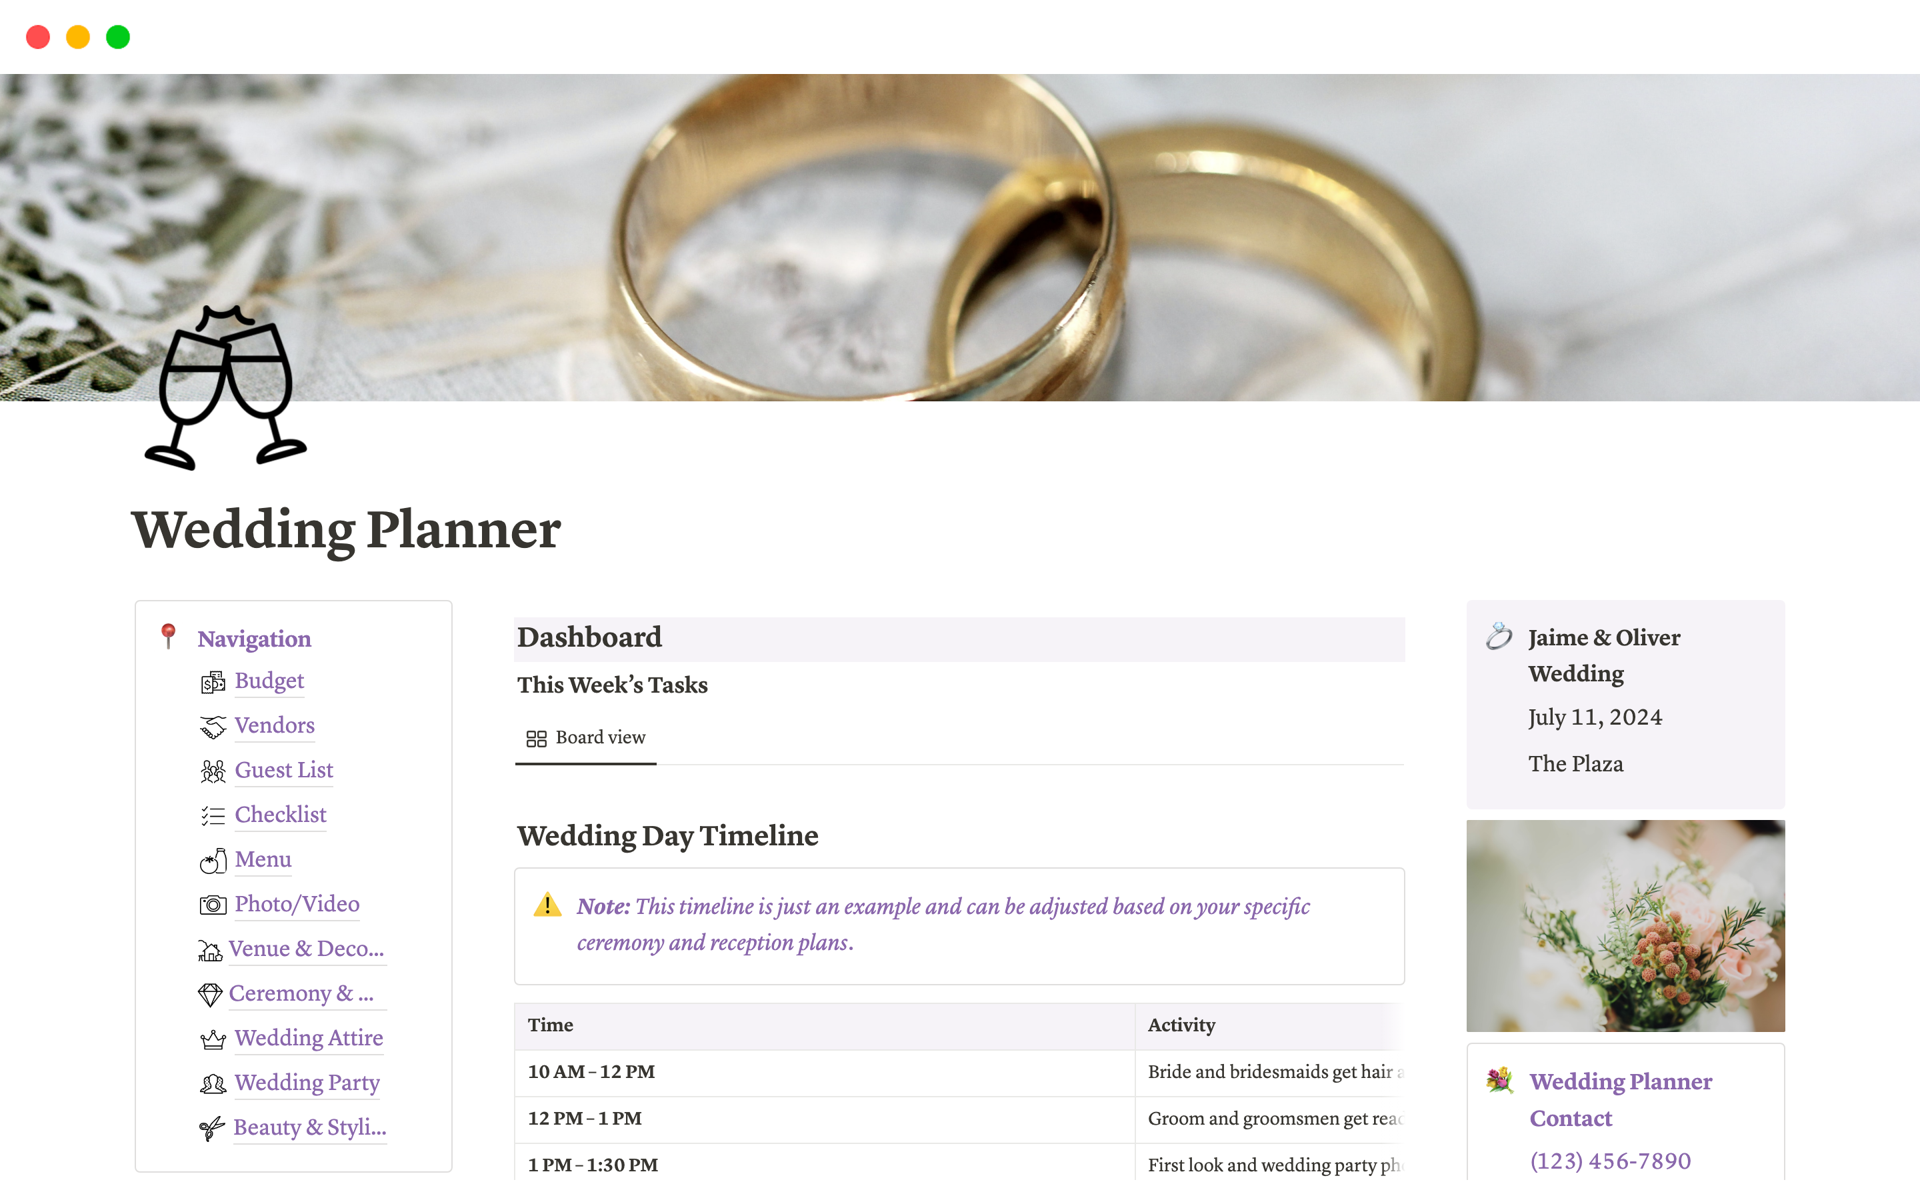 This comprehensive template includes all the essential tools and resources you need to organize and manage every aspect of your wedding.